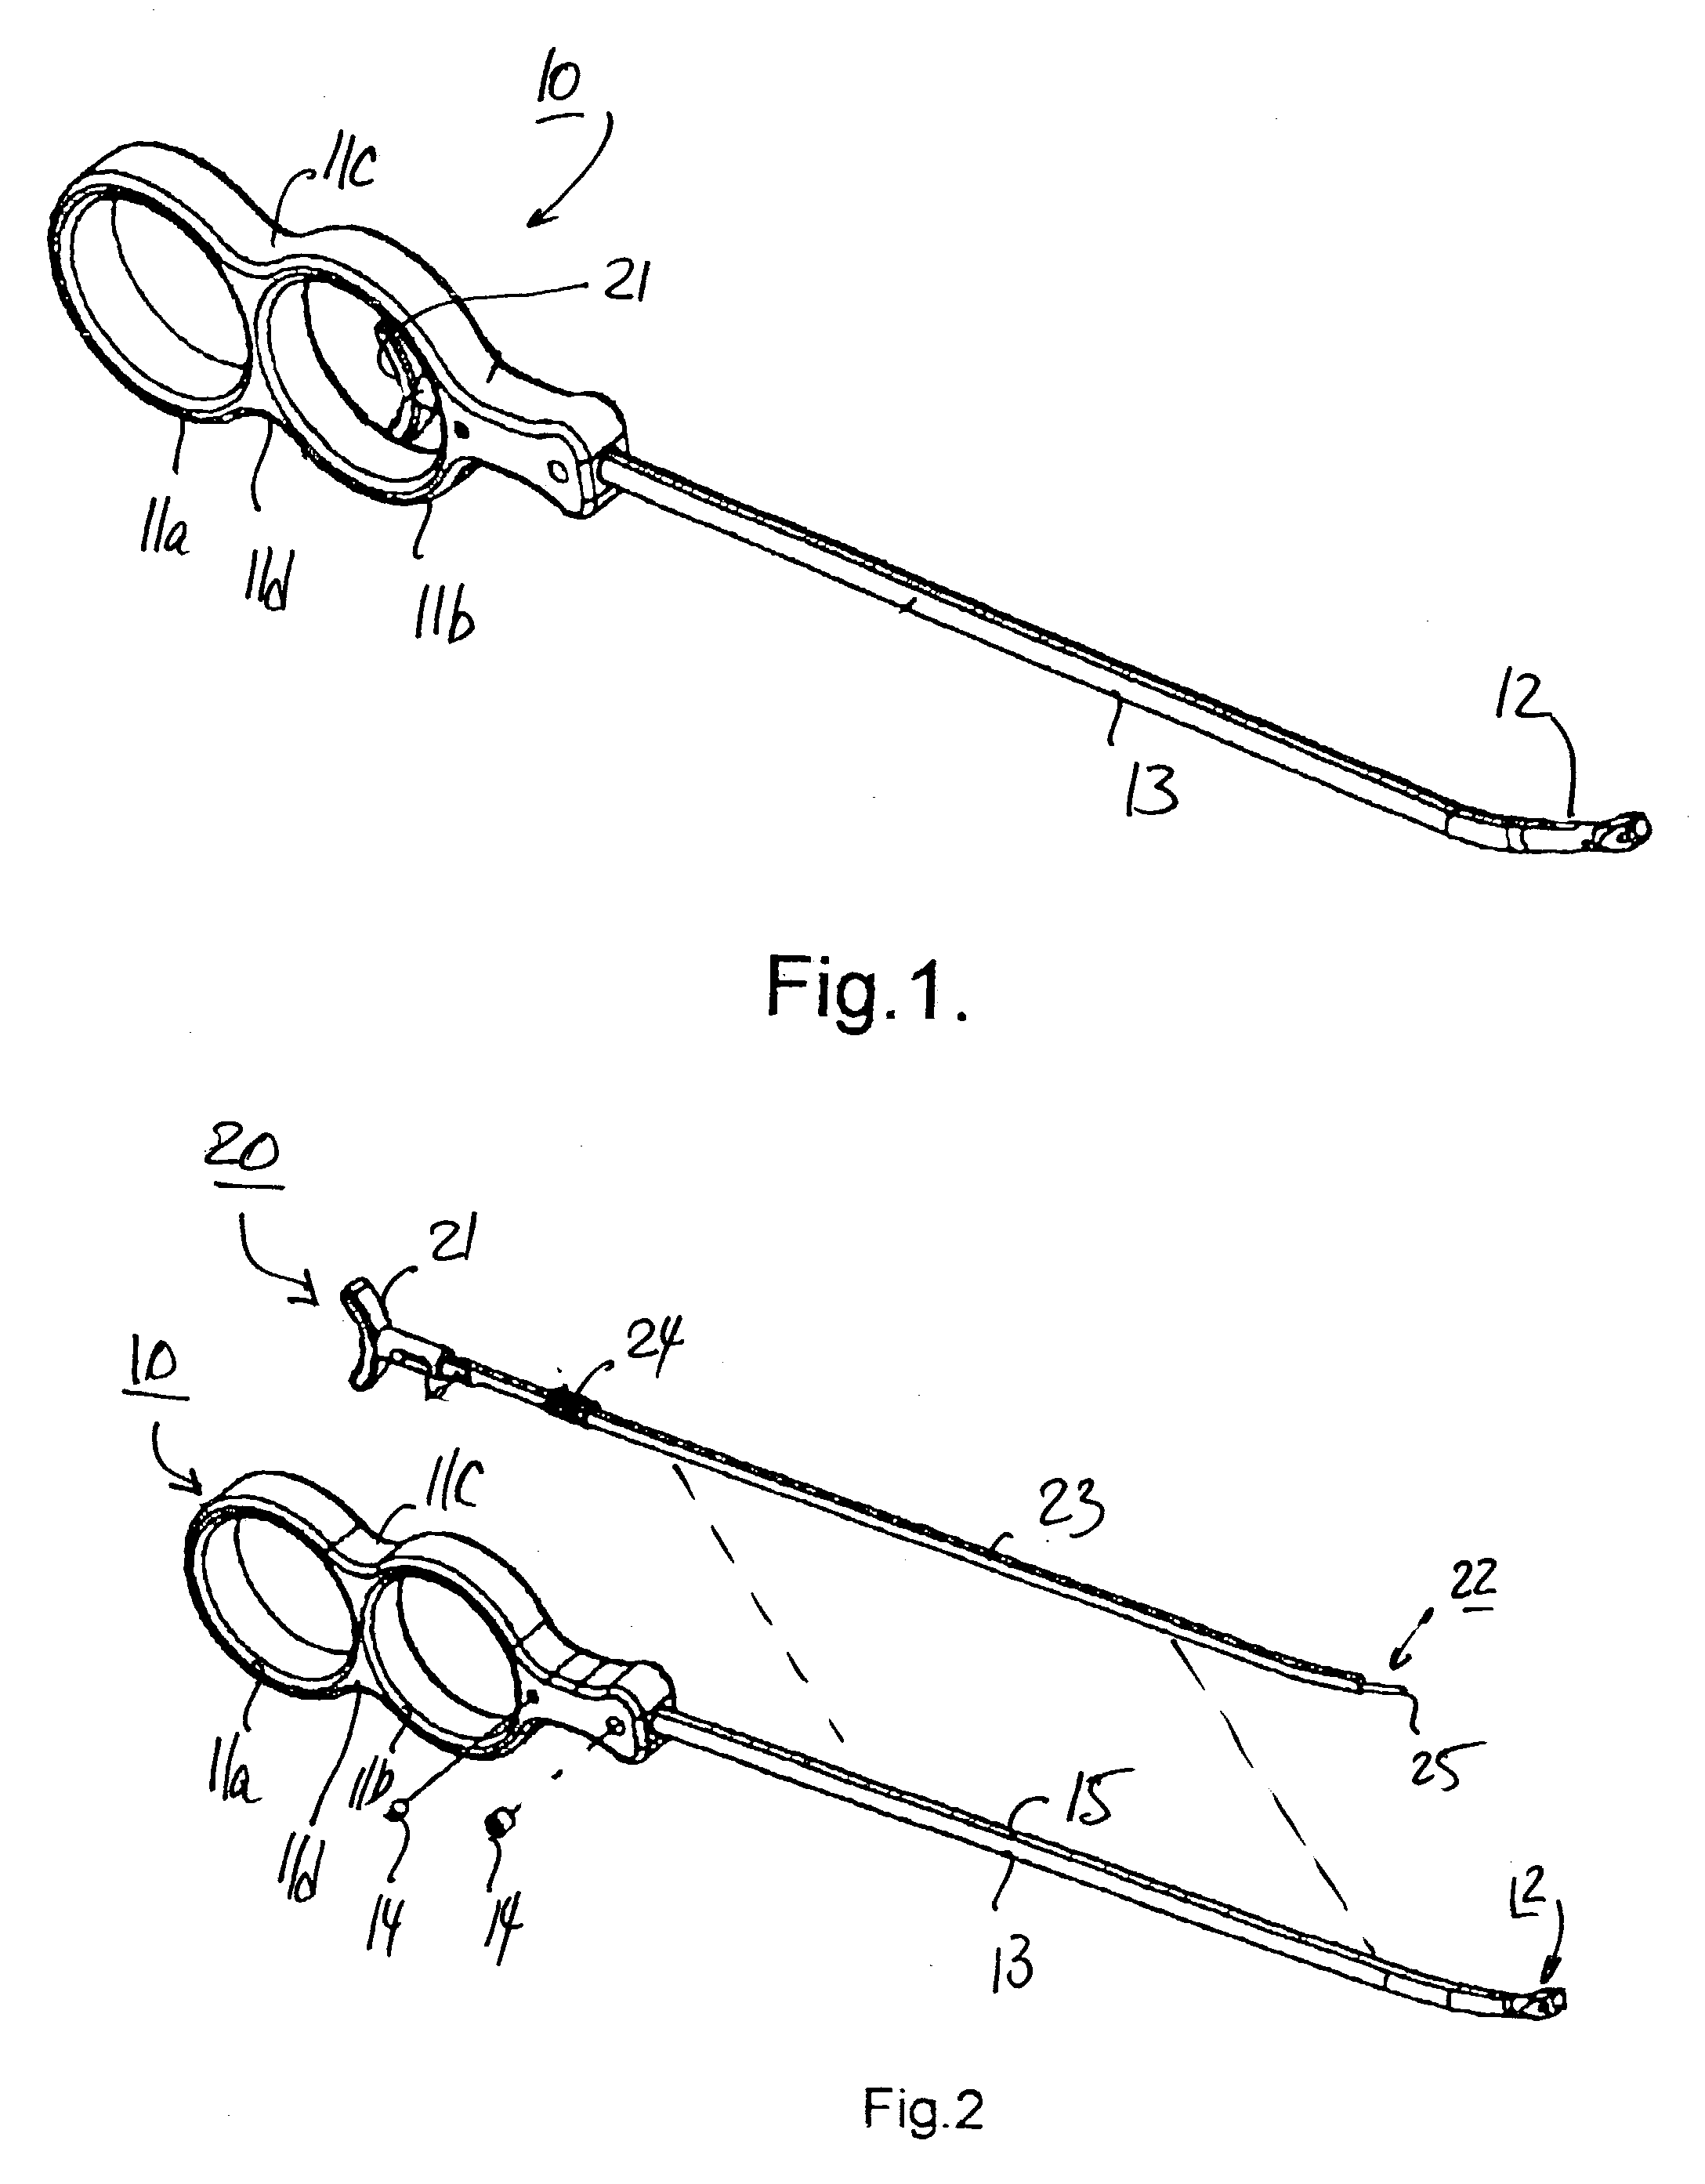 Suture manipulating and/or cutting implement